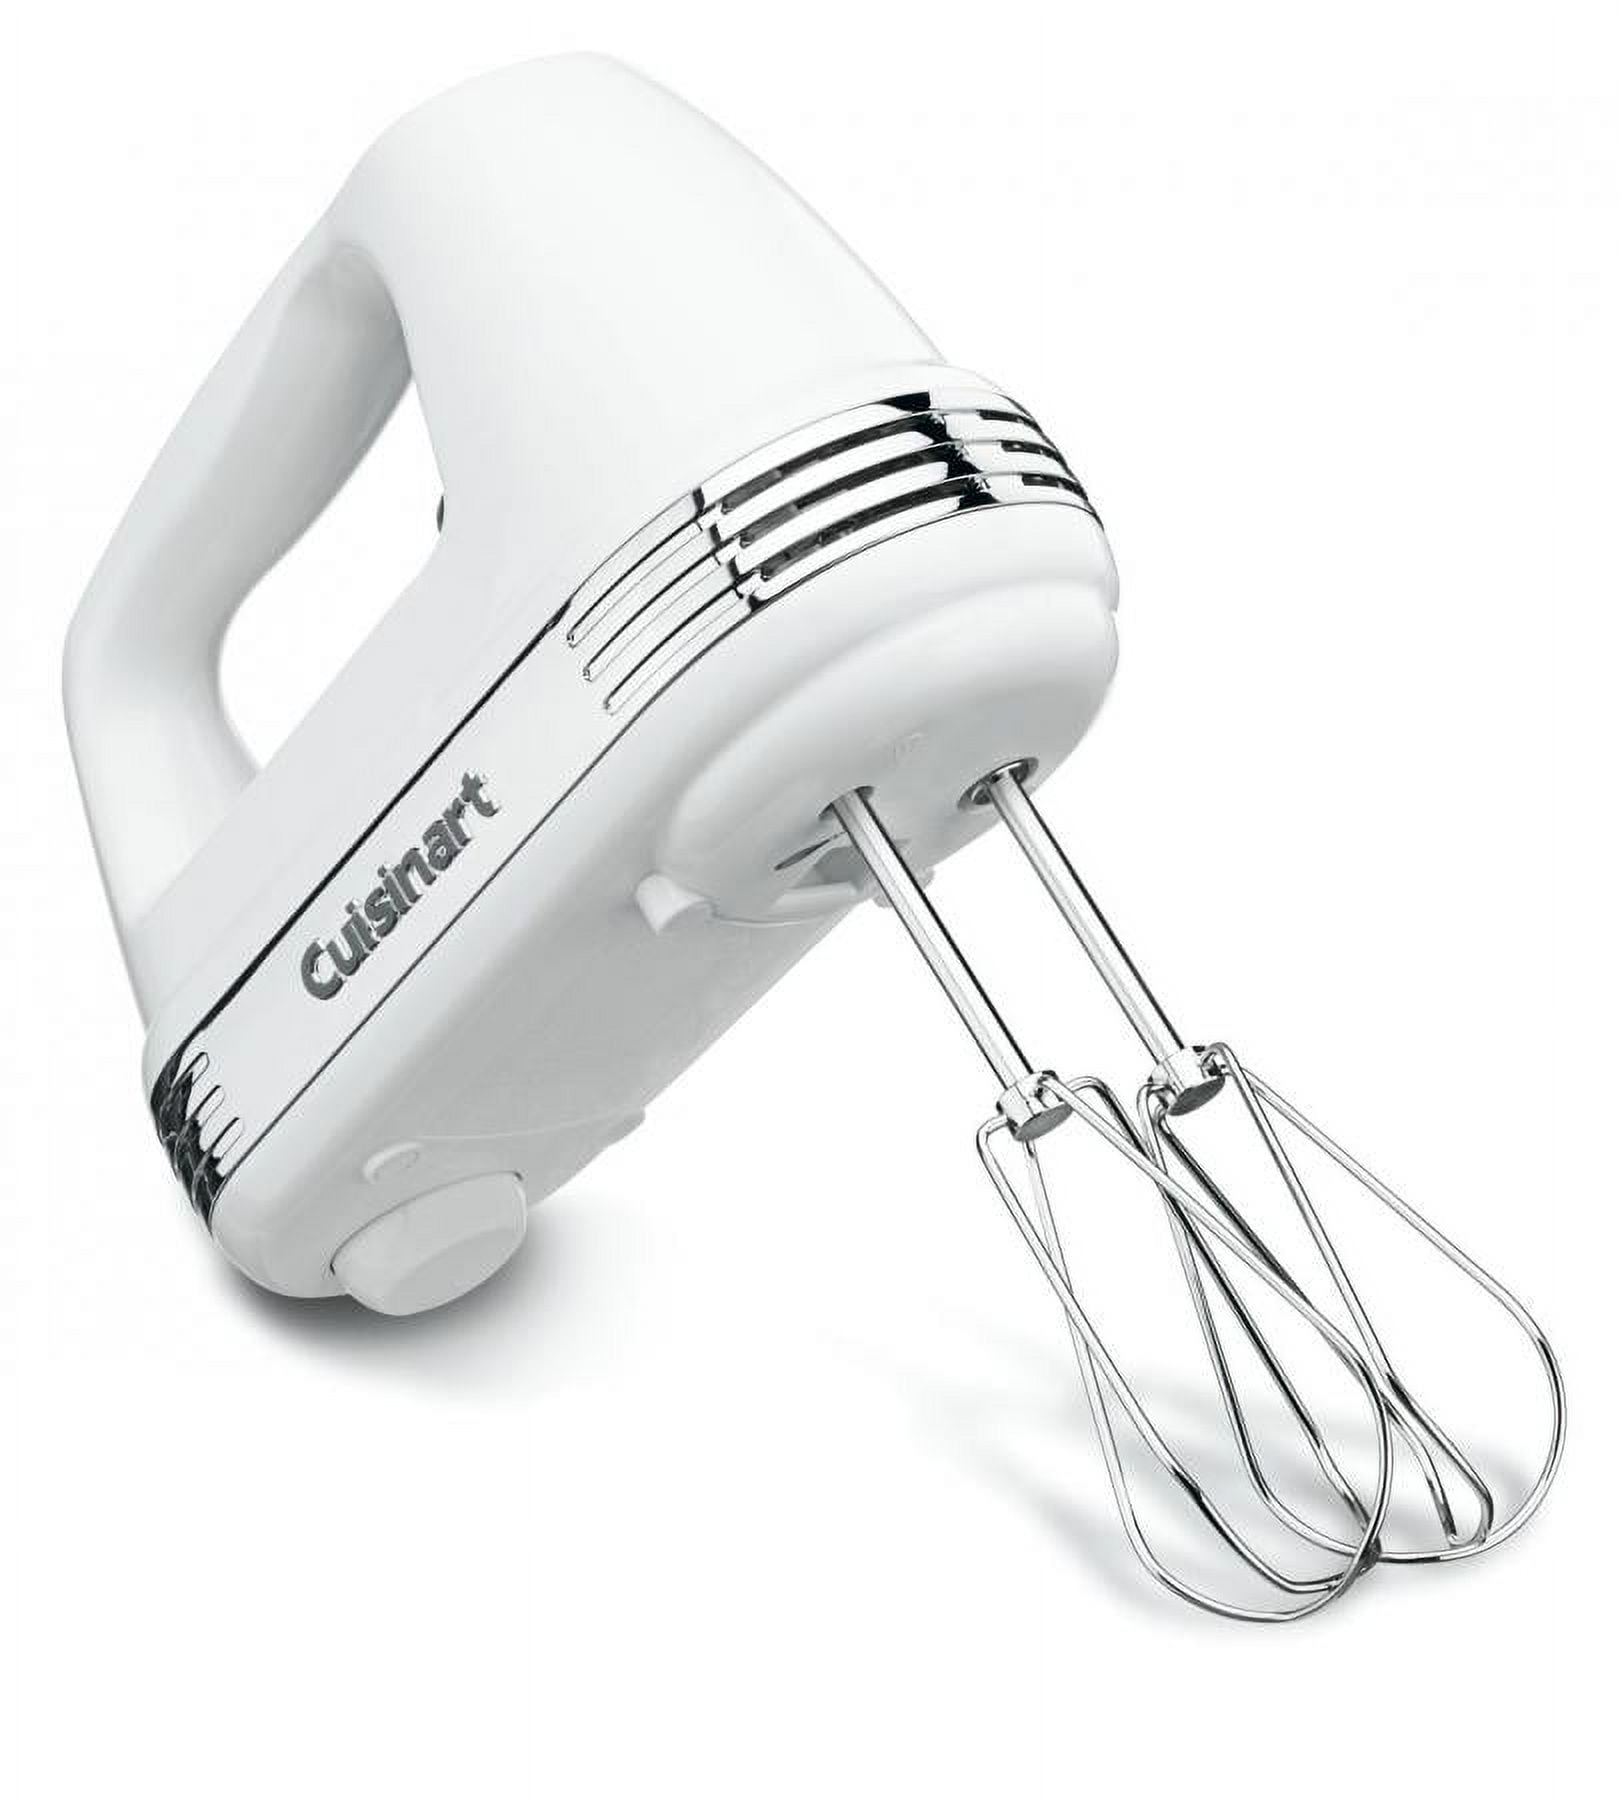  Cuisinart HM-90BCS Power Advantage Plus 9-Speed Handheld Mixer  with Storage Case, Brushed Chrome & CPT-180P1 Metal Classic 4-Slice  toaster, Brushed Stainless: Home & Kitchen